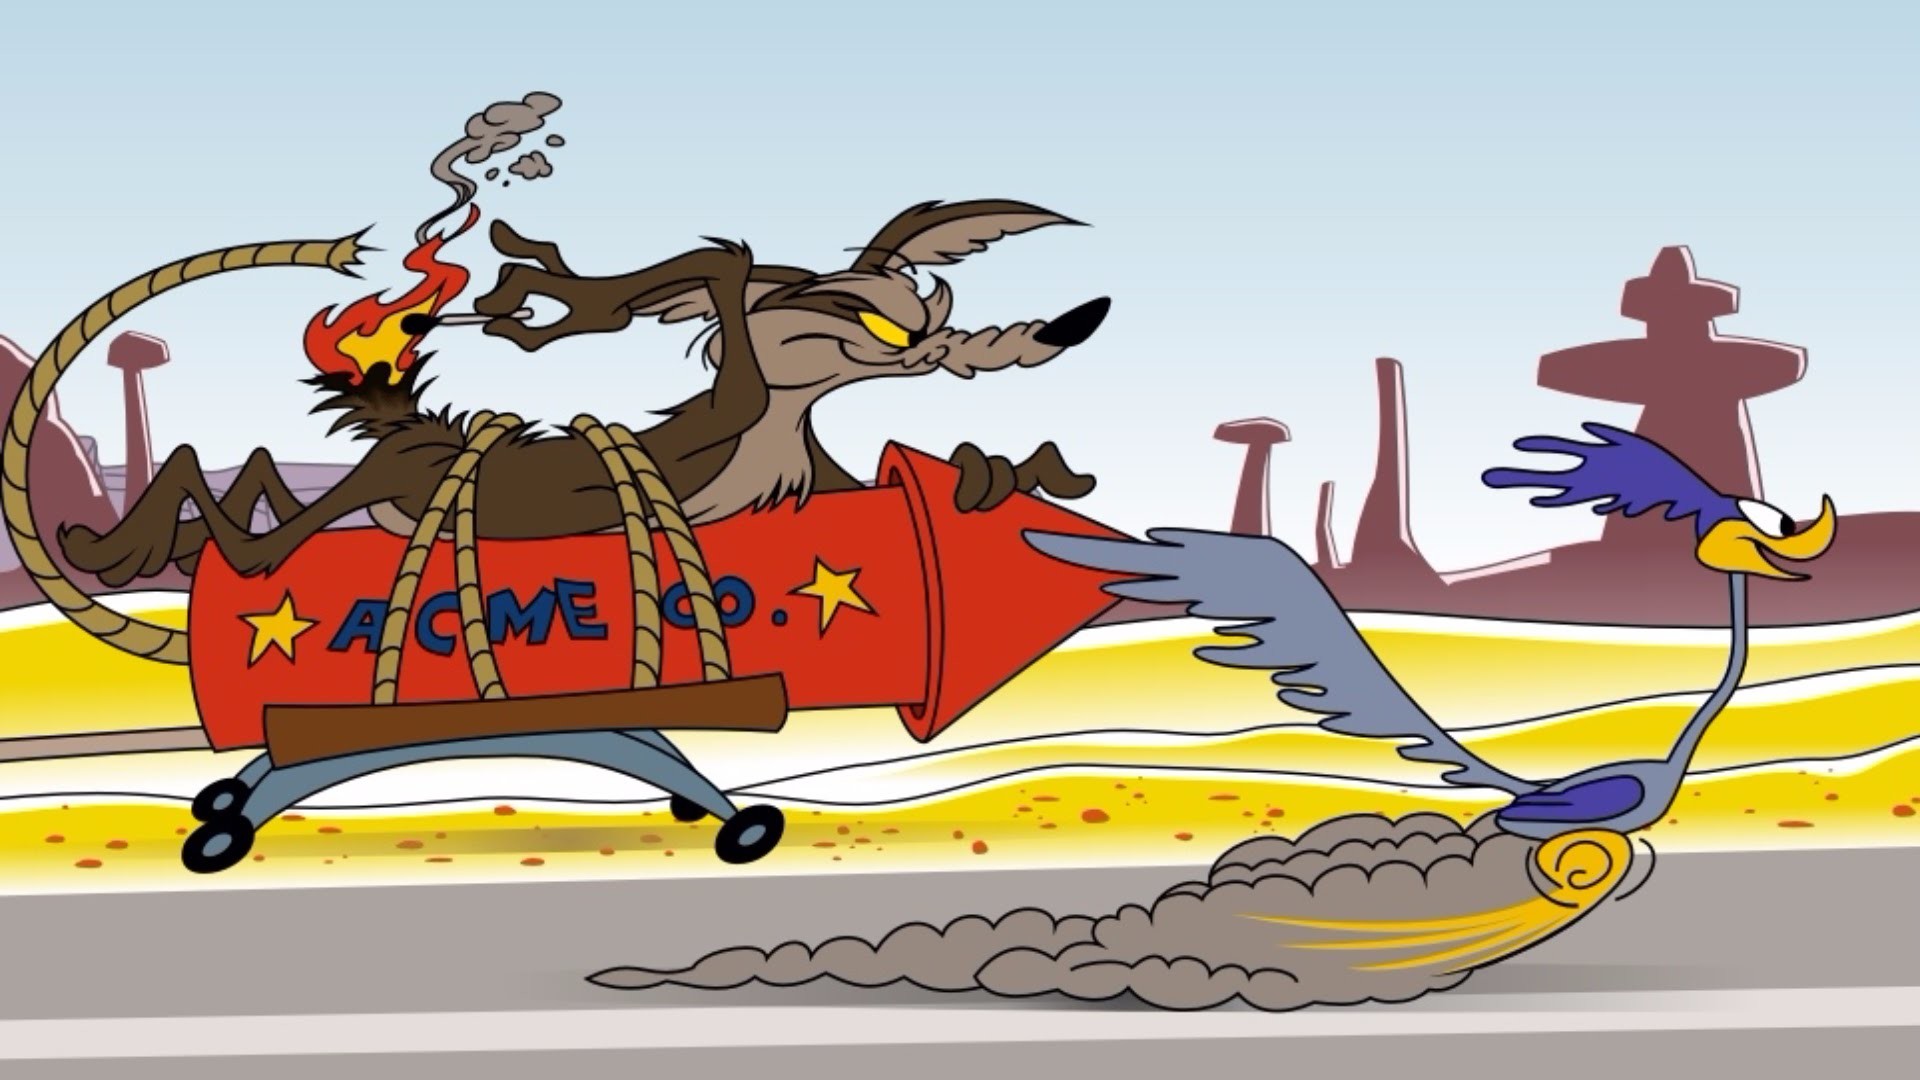 100 best "Wile E. Coyote & Road Runner"…$ images on Pinterest | Road  runner, Coyotes and Runners